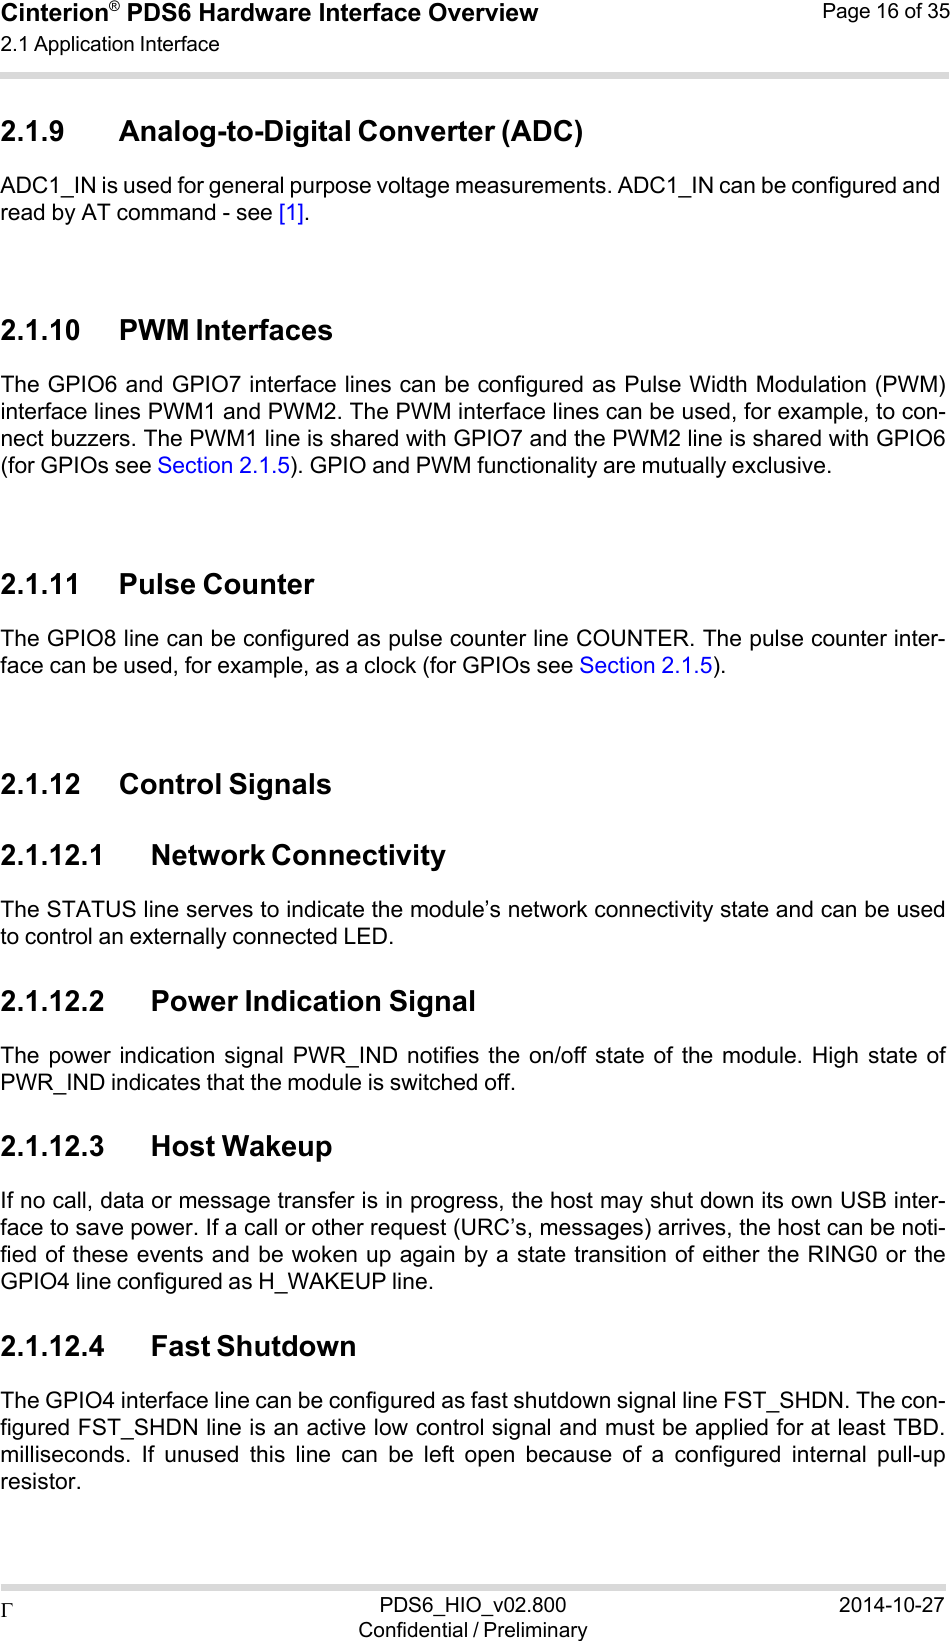  PDS6_HIO_v02.800Confidential / Preliminary2014-10-27Cinterion®  PDS6 Hardware Interface Overview 2.1 Application Interface Page 16 of 35   2.1.9 Analog-to-Digital Converter (ADC) ADC1_IN is used for general purpose voltage measurements. ADC1_IN can be configured and read by AT command - see [1].    2.1.10 PWM Interfaces The GPIO6 and GPIO7 interface lines can be configured as Pulse Width Modulation (PWM) interface lines PWM1 and PWM2. The PWM interface lines can be used, for example, to con- nect buzzers. The PWM1 line is shared with GPIO7 and the PWM2 line is shared with GPIO6 (for GPIOs see Section 2.1.5). GPIO and PWM functionality are mutually exclusive.    2.1.11 Pulse Counter The GPIO8 line can be configured as pulse counter line COUNTER. The pulse counter inter- face can be used, for example, as a clock (for GPIOs see Section 2.1.5).    2.1.12 Control Signals  2.1.12.1 Network Connectivity The STATUS line serves to indicate the module’s network connectivity state and can be used to control an externally connected LED.  2.1.12.2 Power Indication Signal The power  indication signal  PWR_IND  notifies the  on/off  state  of  the  module.  High  state of PWR_IND indicates that the module is switched off.  2.1.12.3 Host Wakeup If no call, data or message transfer is in progress, the host may shut down its own USB inter- face to save power. If a call or other request (URC’s, messages) arrives, the host can be noti- fied of these events and be woken up again by a state transition of either the RING0 or the GPIO4 line configured as H_WAKEUP line.  2.1.12.4 Fast Shutdown The GPIO4 interface line can be configured as fast shutdown signal line FST_SHDN. The con- figured FST_SHDN line is an active low control signal and must be applied for at least TBD. milliseconds.  If  unused  this  line  can  be  left  open  because  of  a  configured  internal  pull-up resistor. 